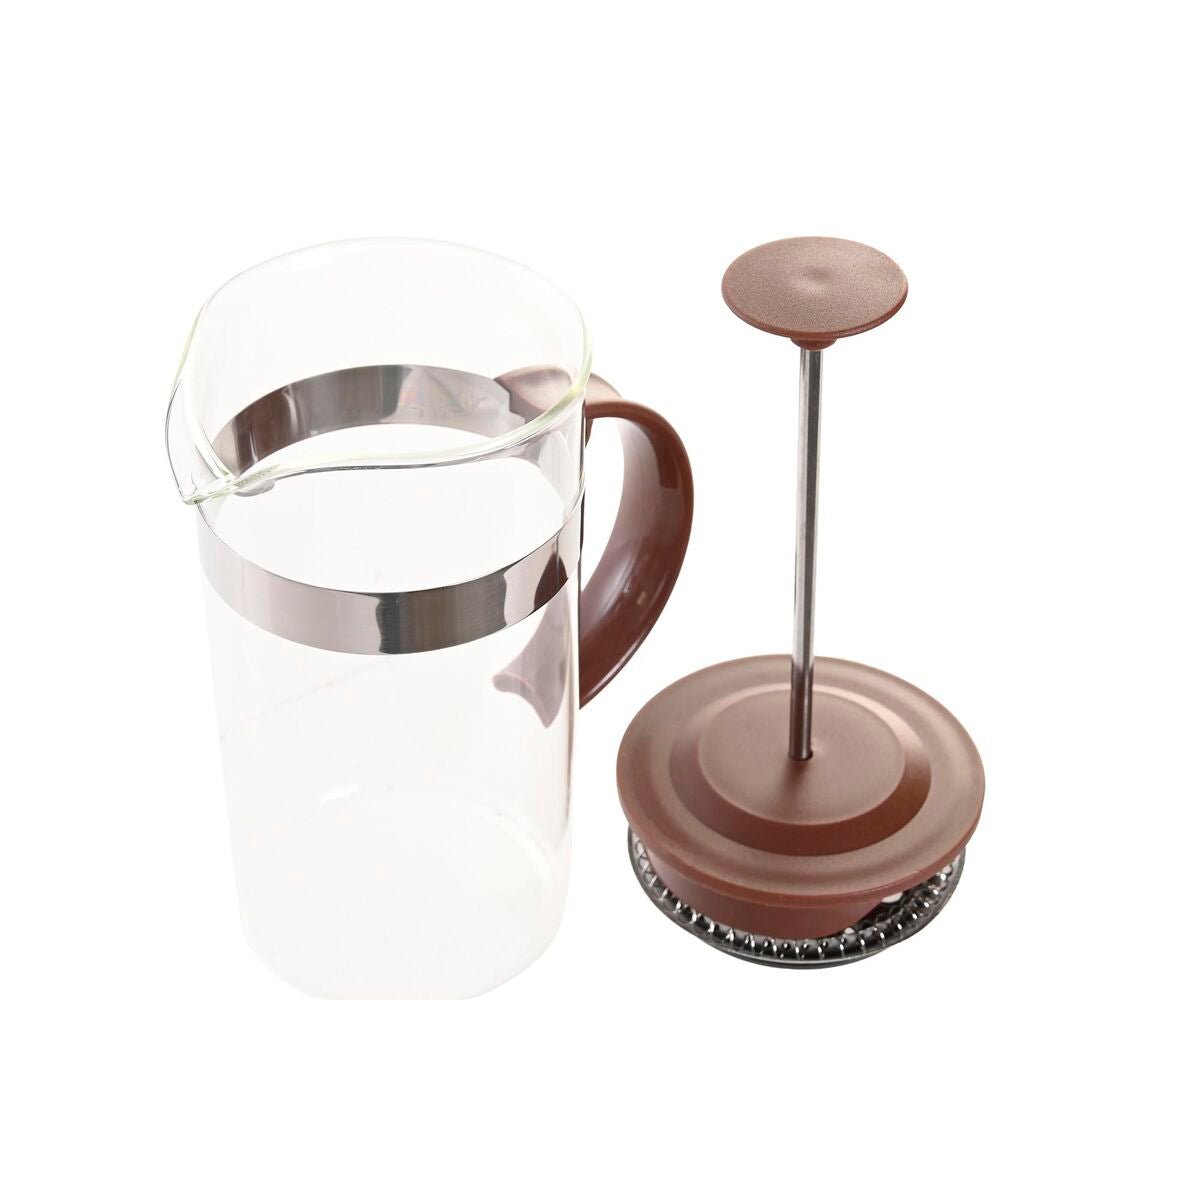 Cafetière with Plunger DKD Home Decor Brown Transparent Stainless steel Borosilicate Glass 350 ml 16 x 9 x 18,5 cm - WM24 Store